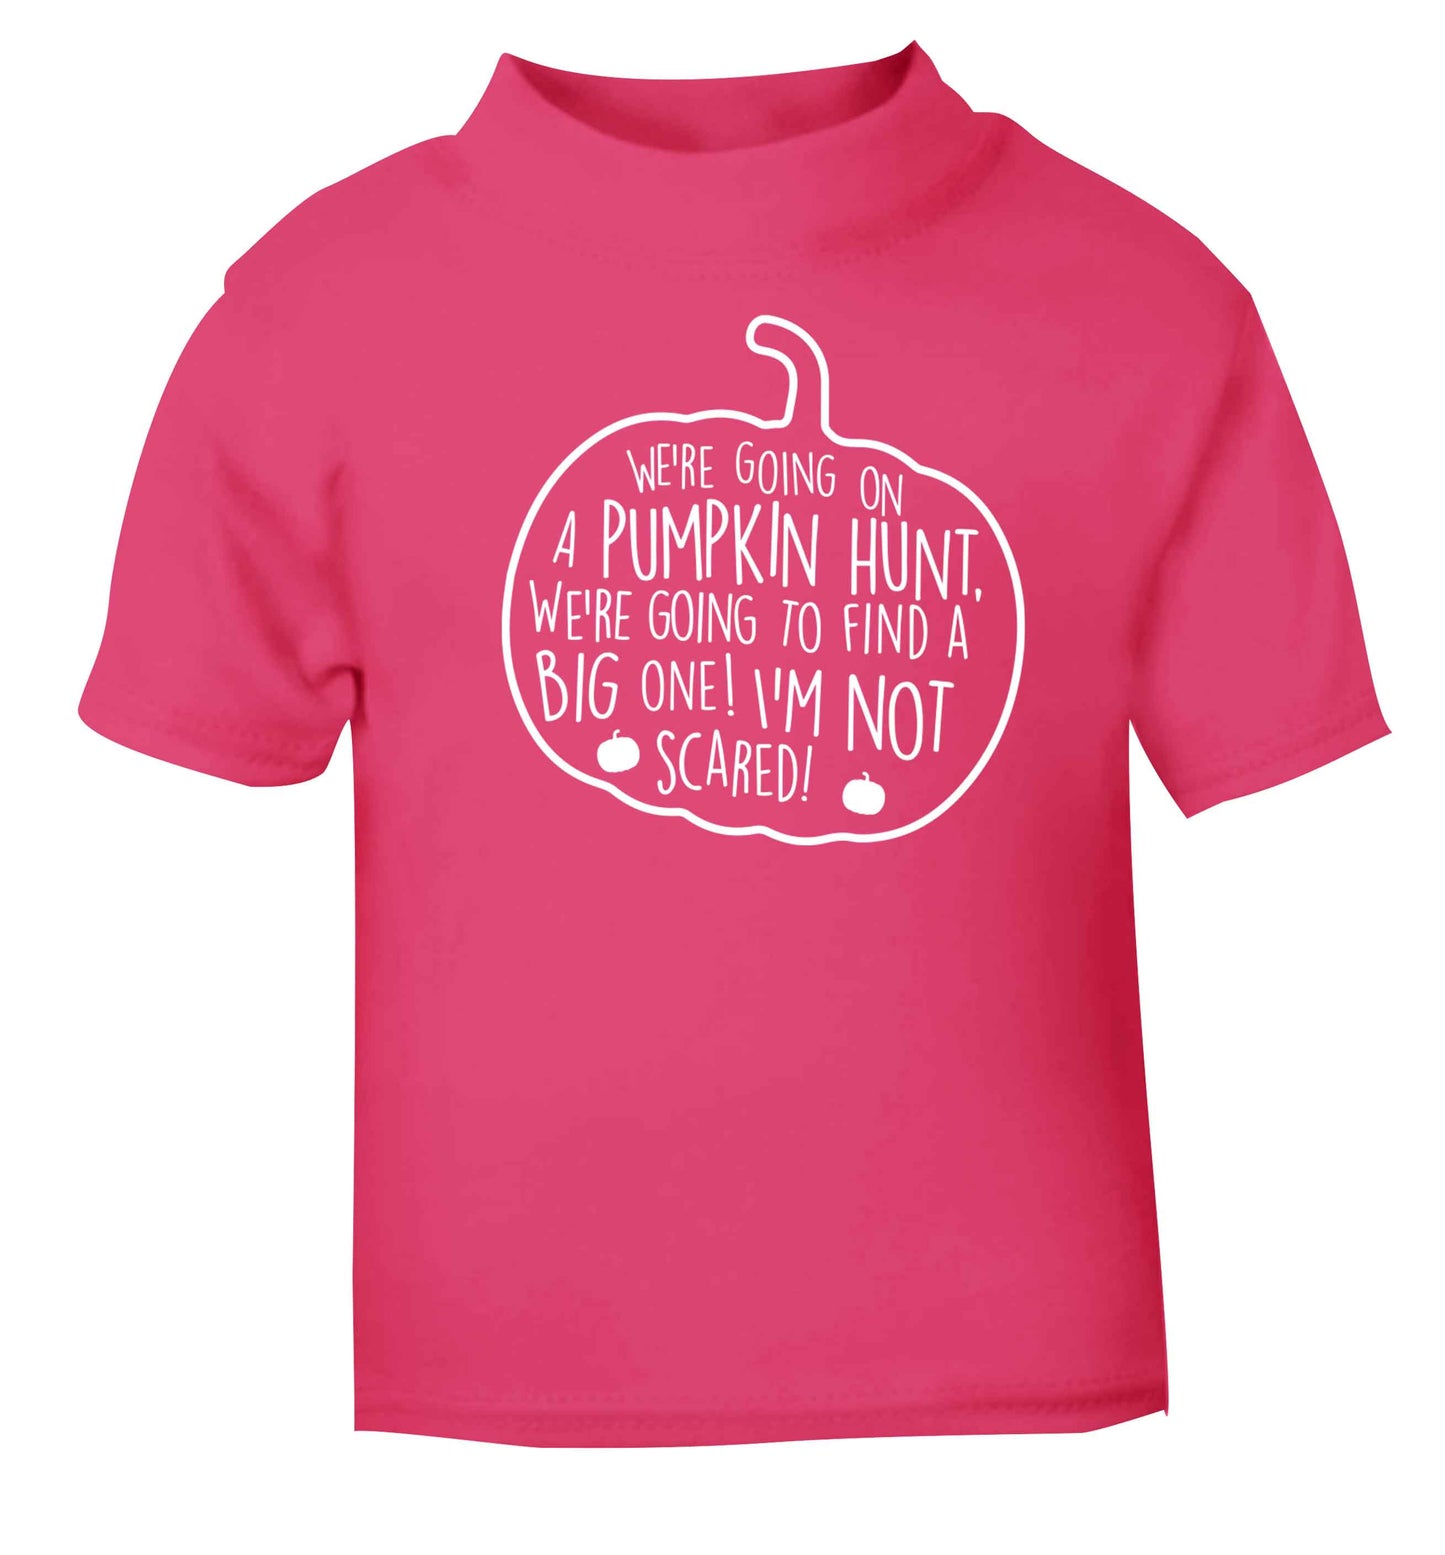 We're going on a pumpkin hunt pink baby toddler Tshirt 2 Years